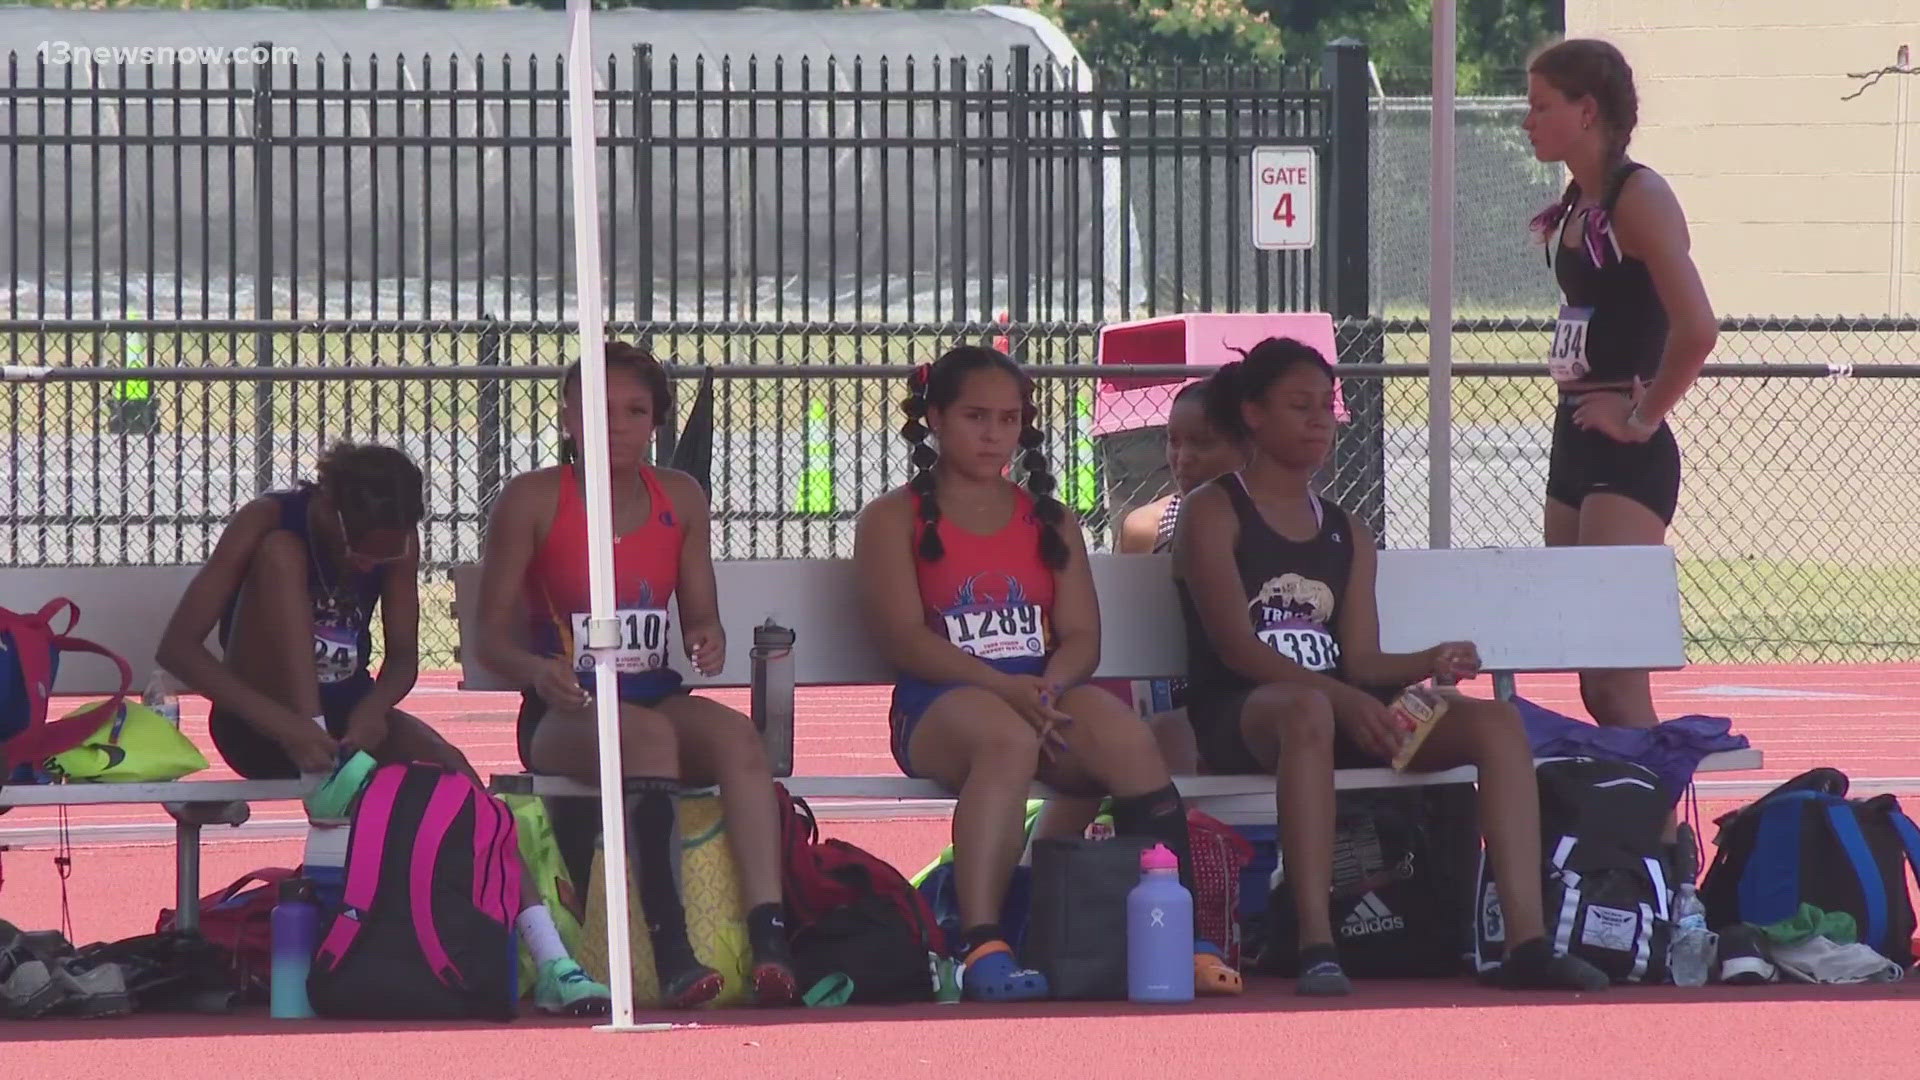 Young athletes in Newport News competed under the hot sun with hopes of making it to the Junior Olympics next month.